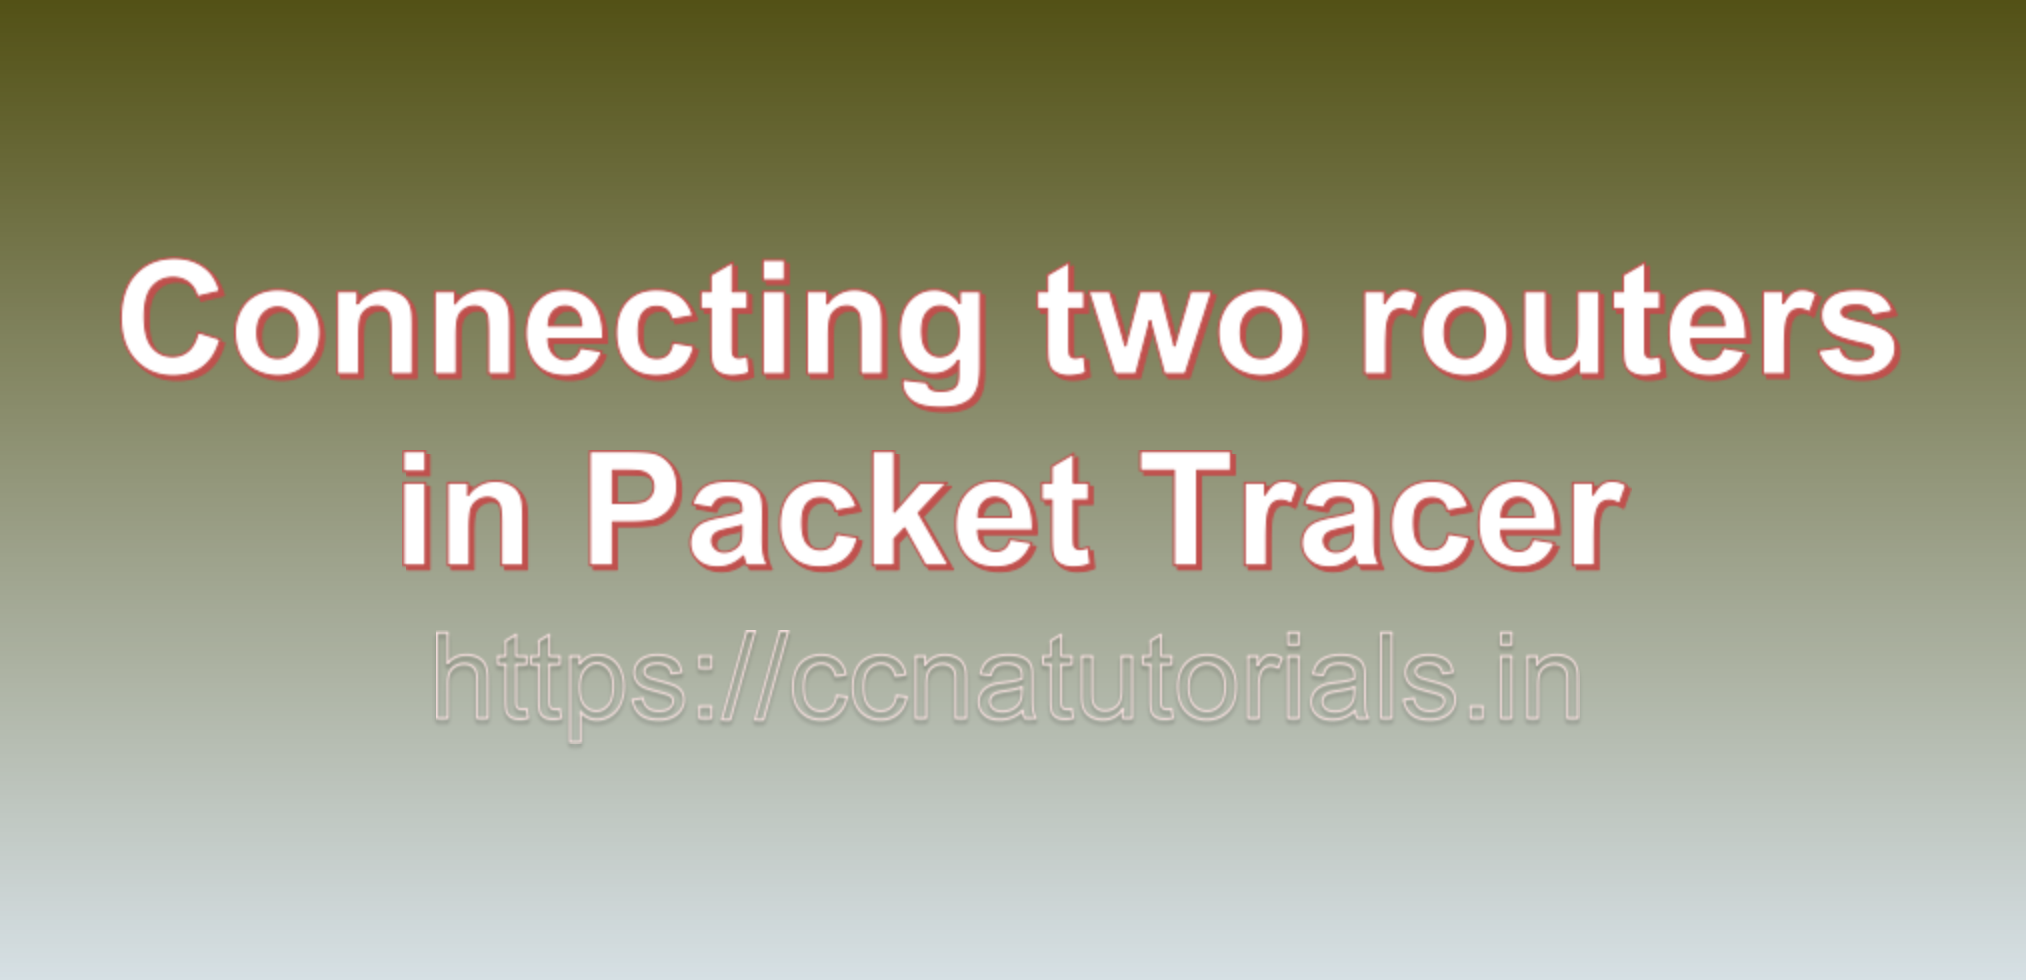 Connecting two routers in Packet Tracer, ccna, ccna tutorials